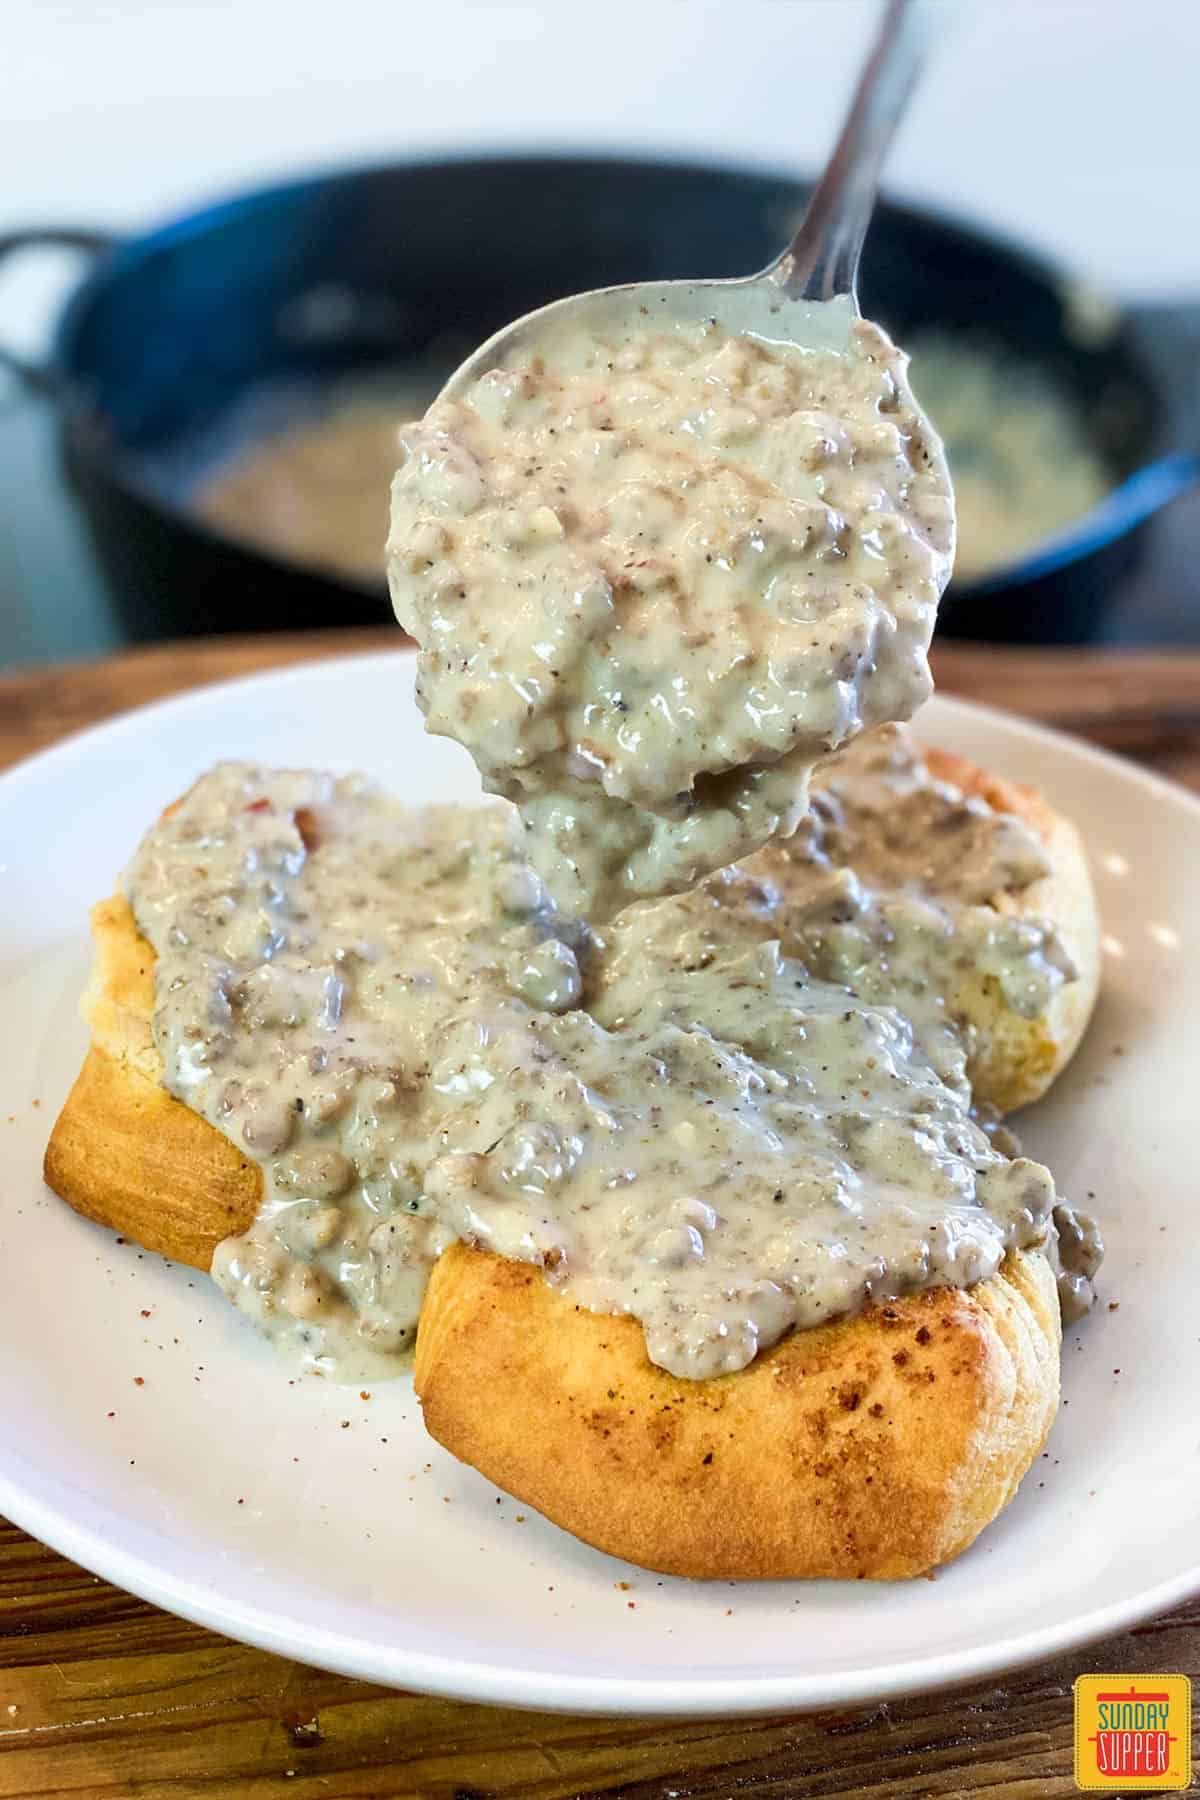 Pouring gravy on sausage biscuits gravy on white plate